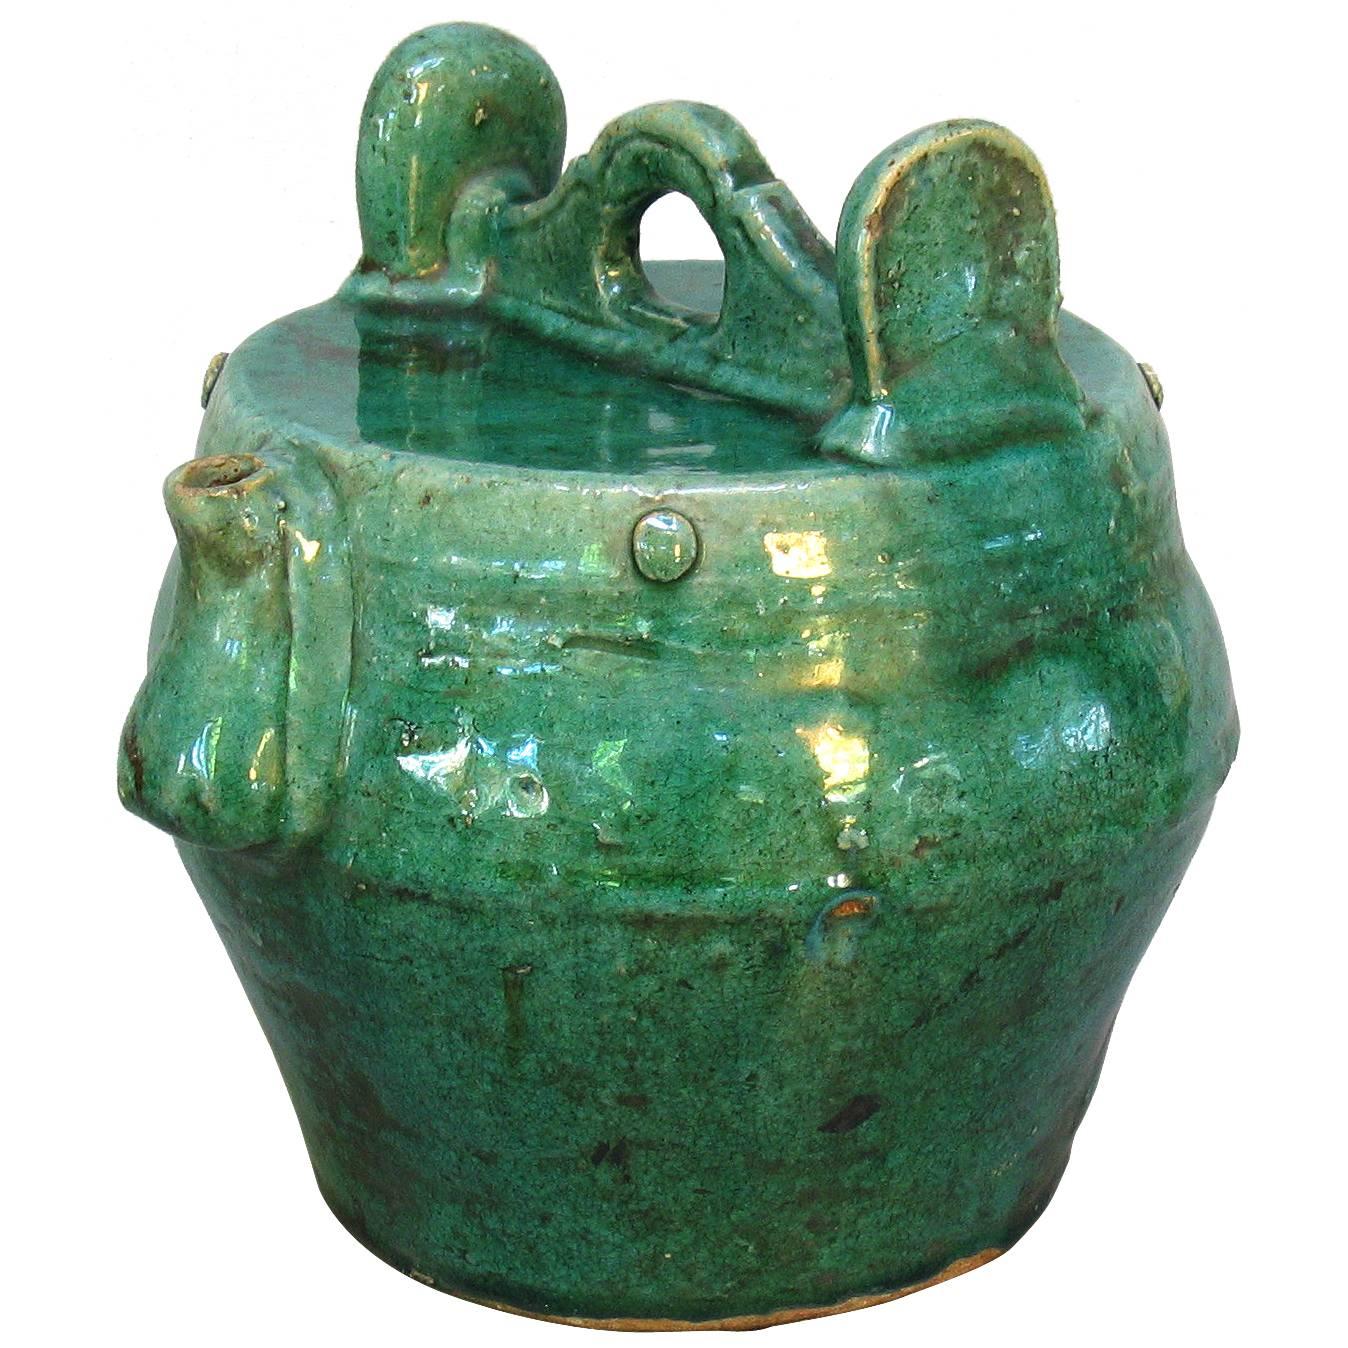 Emerald Green Glazed Shiwan Pottery Teapot Qing Dynasty, Late 19th Century